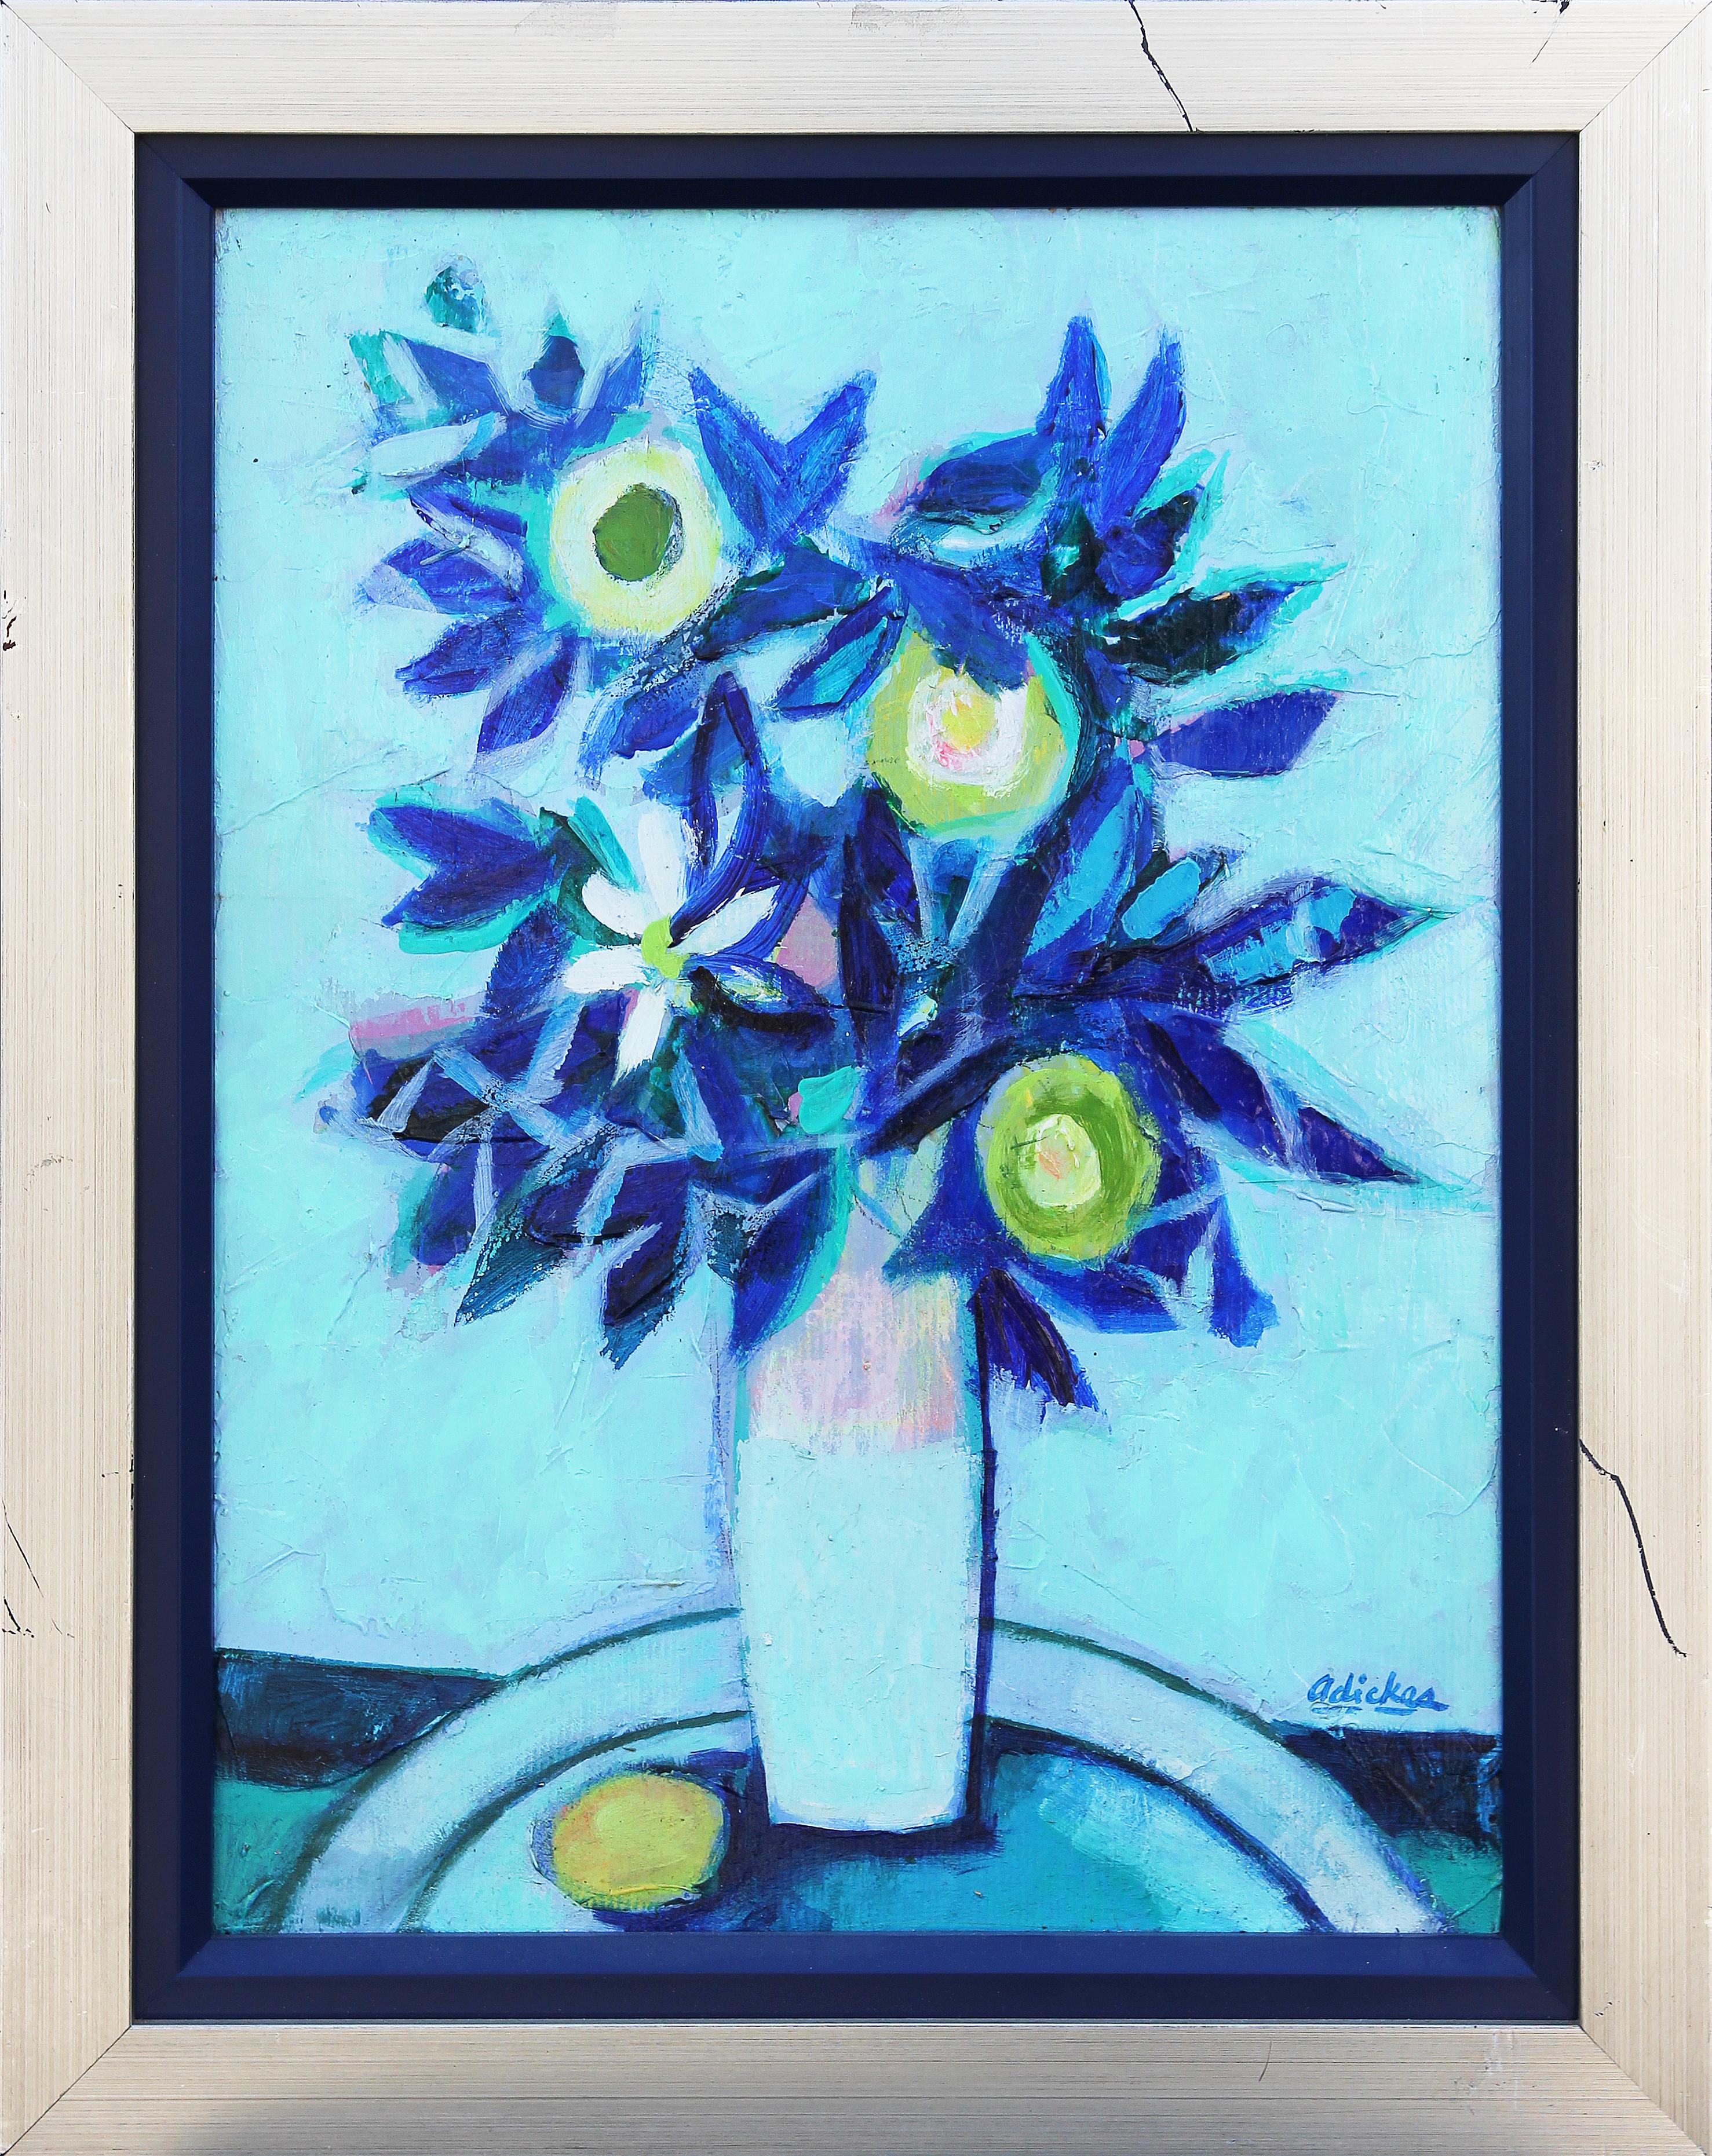 David Adickes Still-Life Painting - "Bouquet, Blue Leaves, and Lemon" Blue and Yellow Toned Abstract Still Life